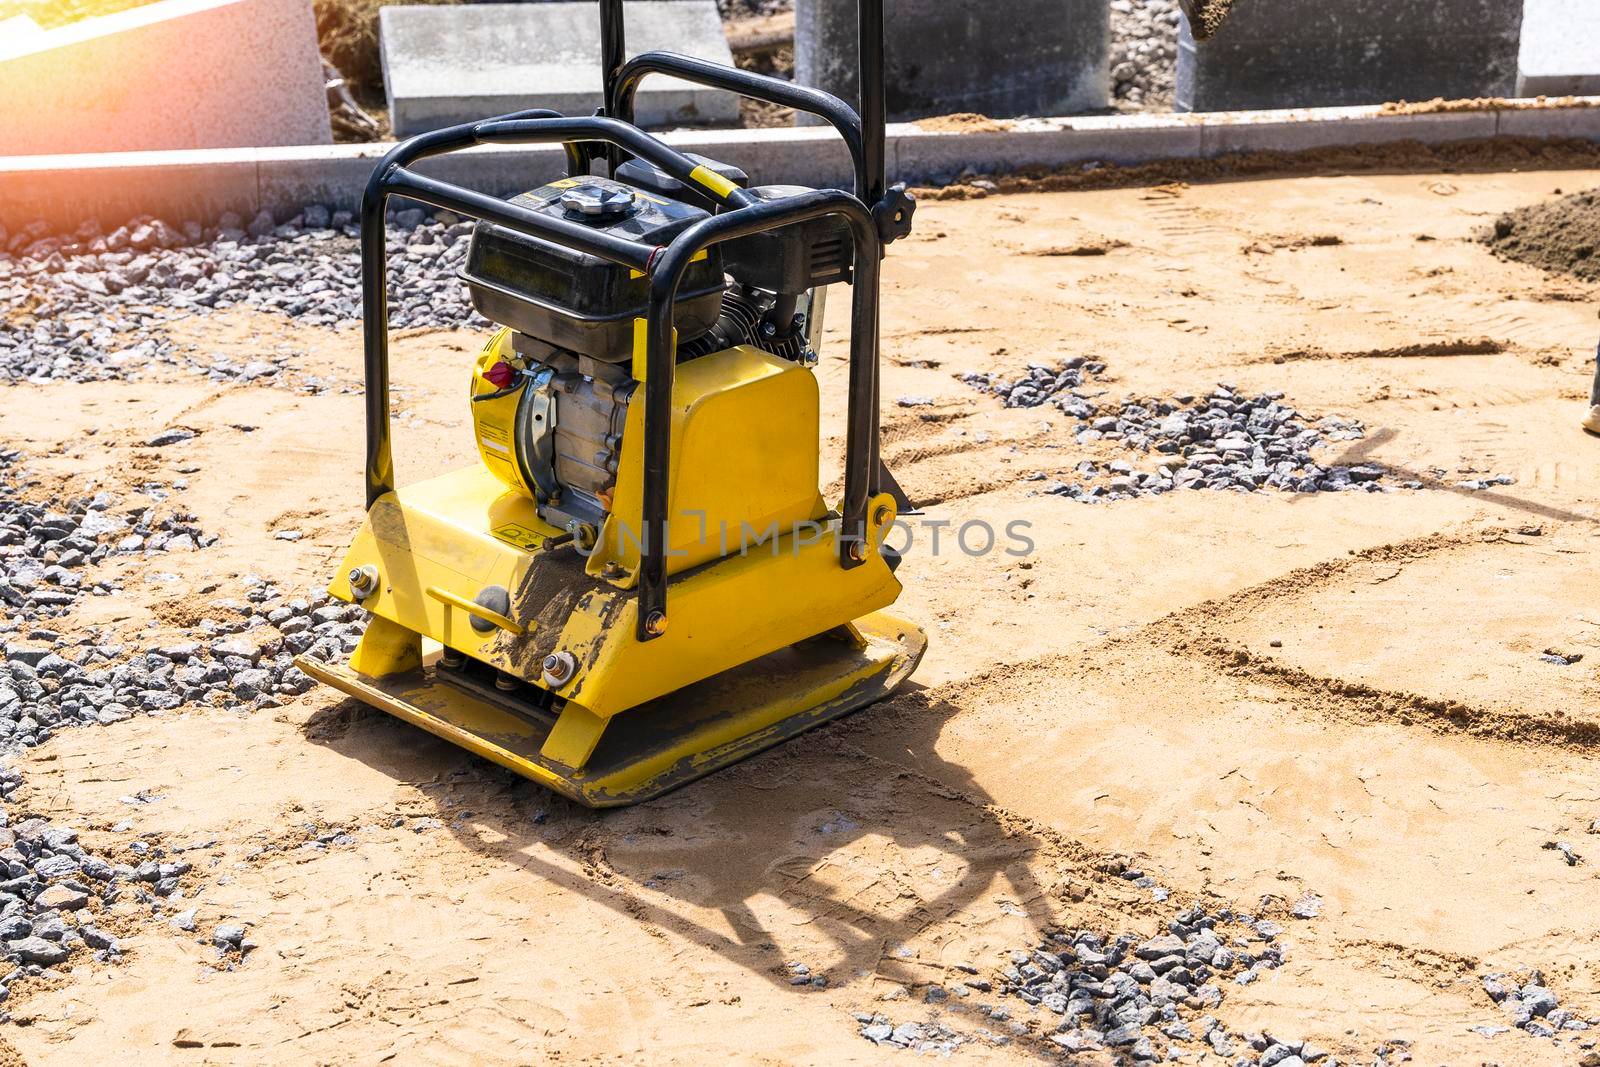 construction gasoline vibration rammer. Ramming construction equipment for leveling roads. soil compaction on the construction site, sand compaction. Gasoline manual vibration compactor for road works. High quality photo